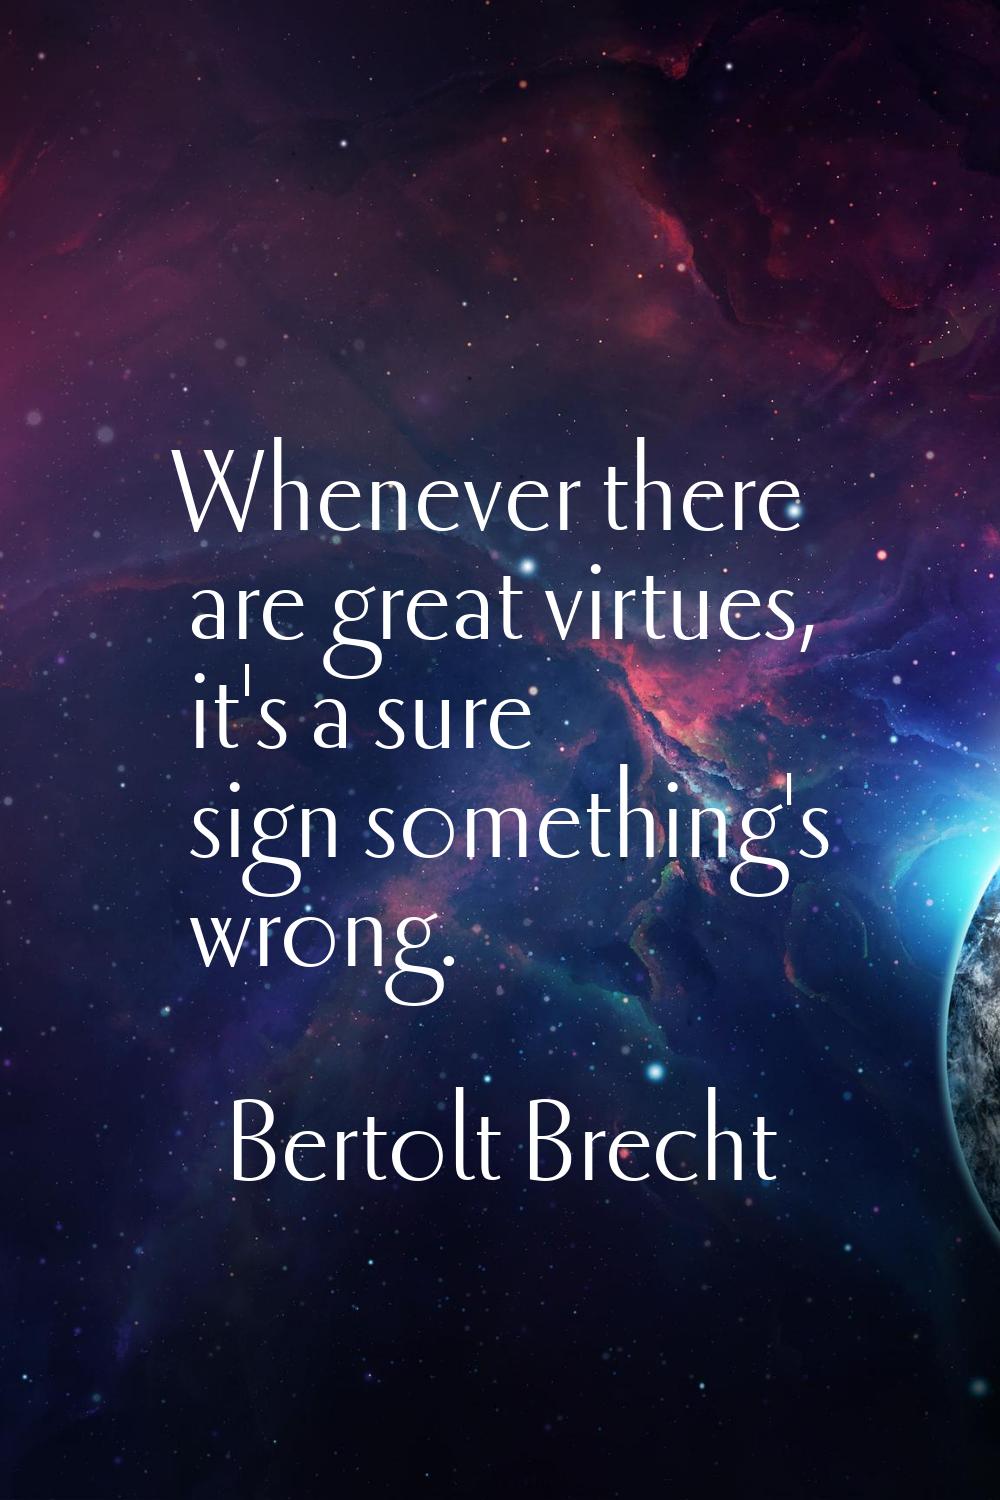 Whenever there are great virtues, it's a sure sign something's wrong.